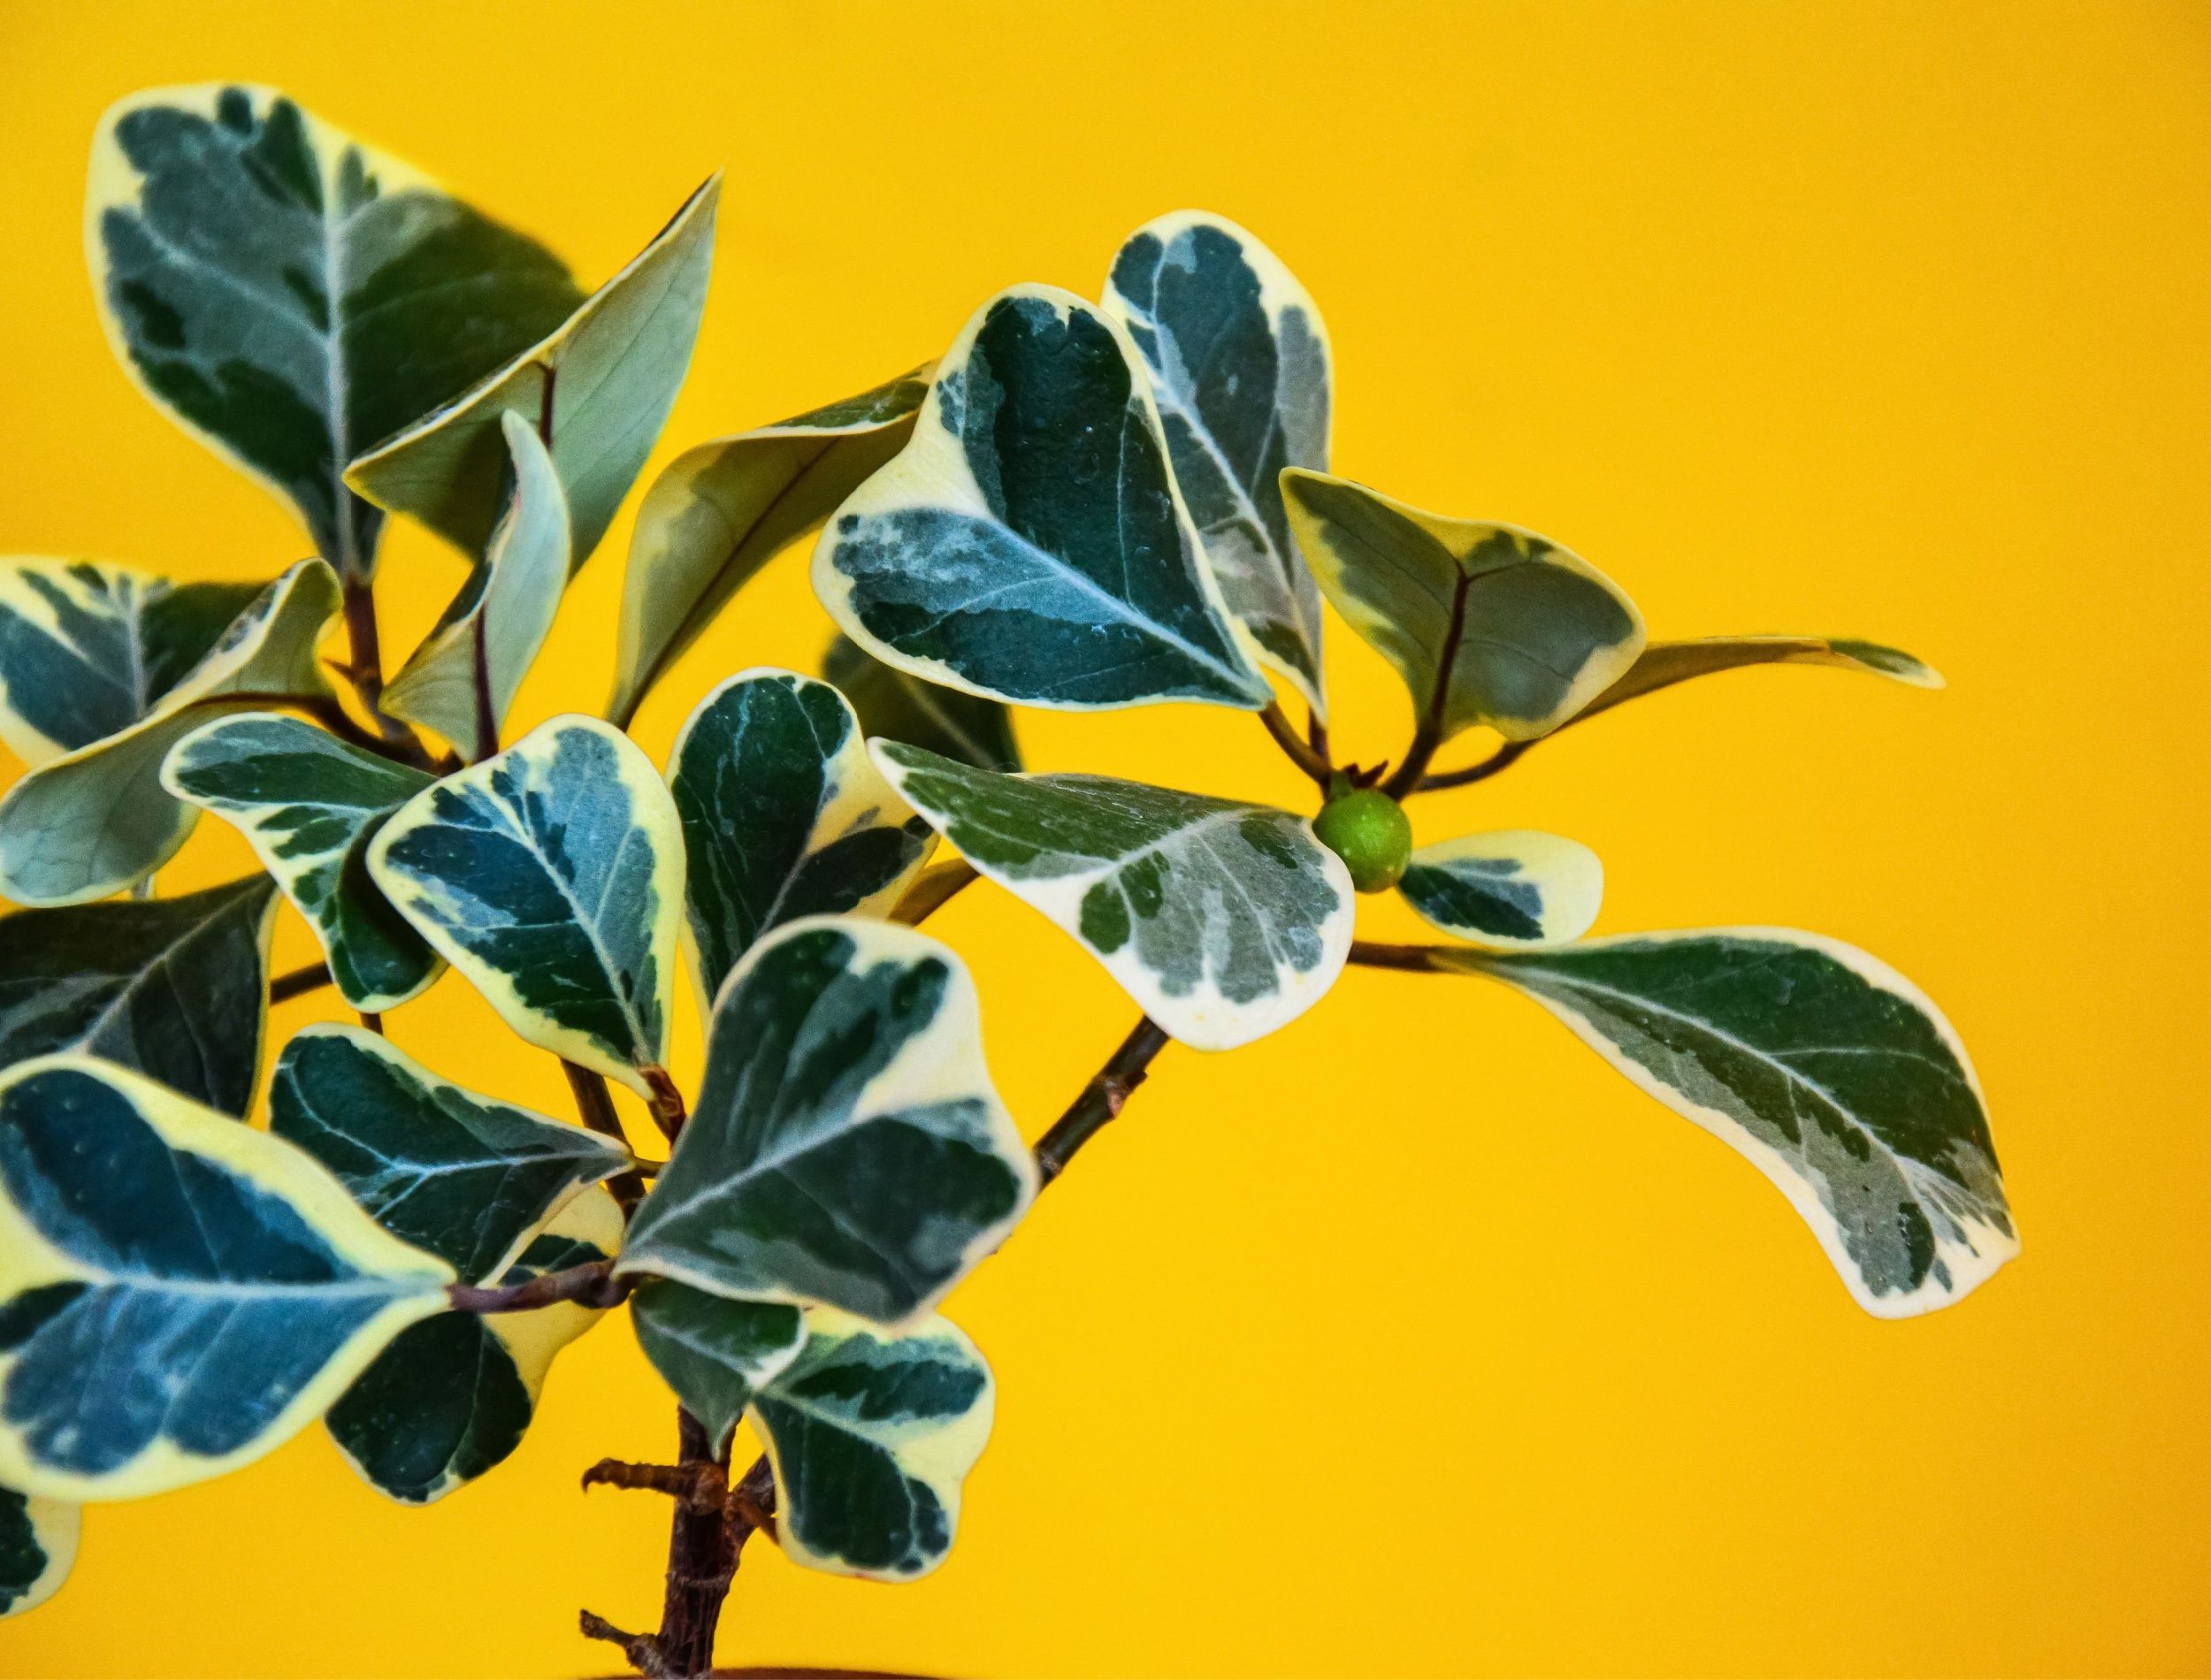 Variegate Ficus with triangular leaves on a yellow background. Ficus Triangularis